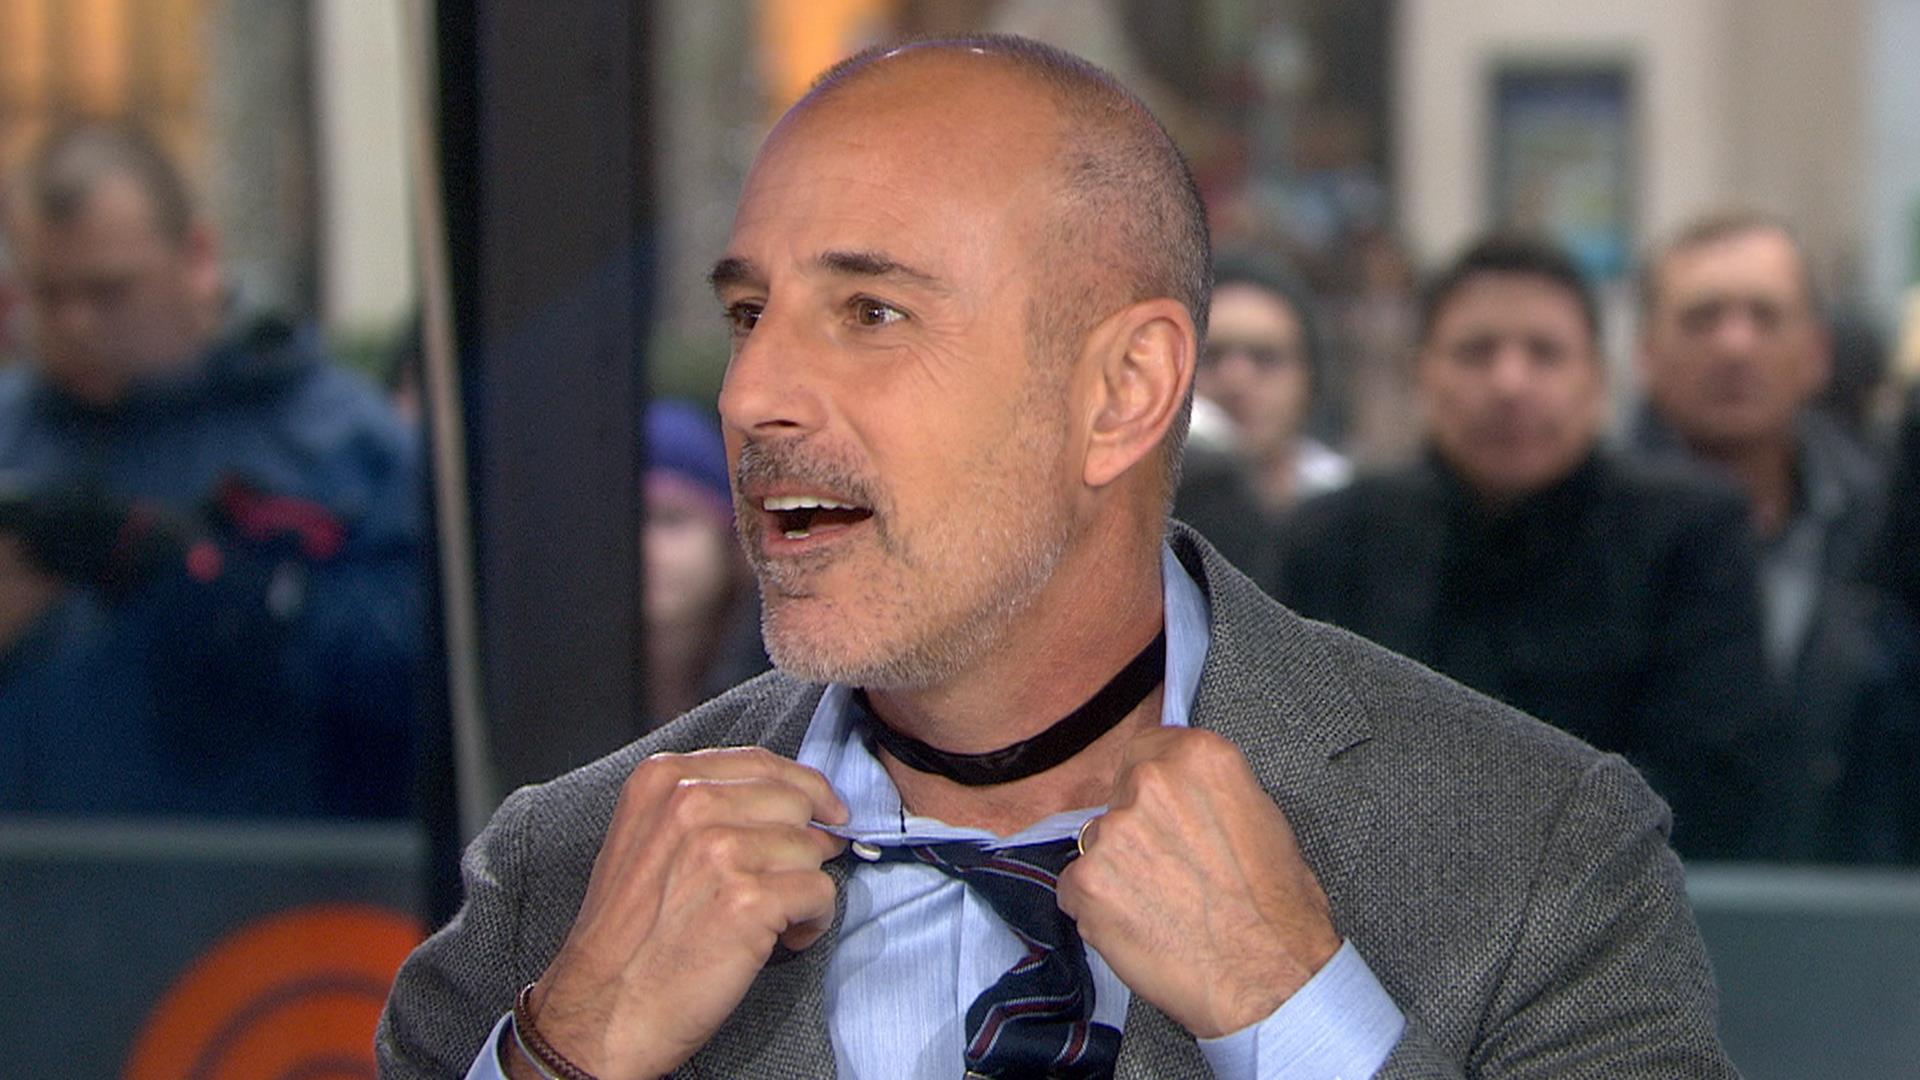 Matt Lauer wore a choker necklace nothing will ever be the